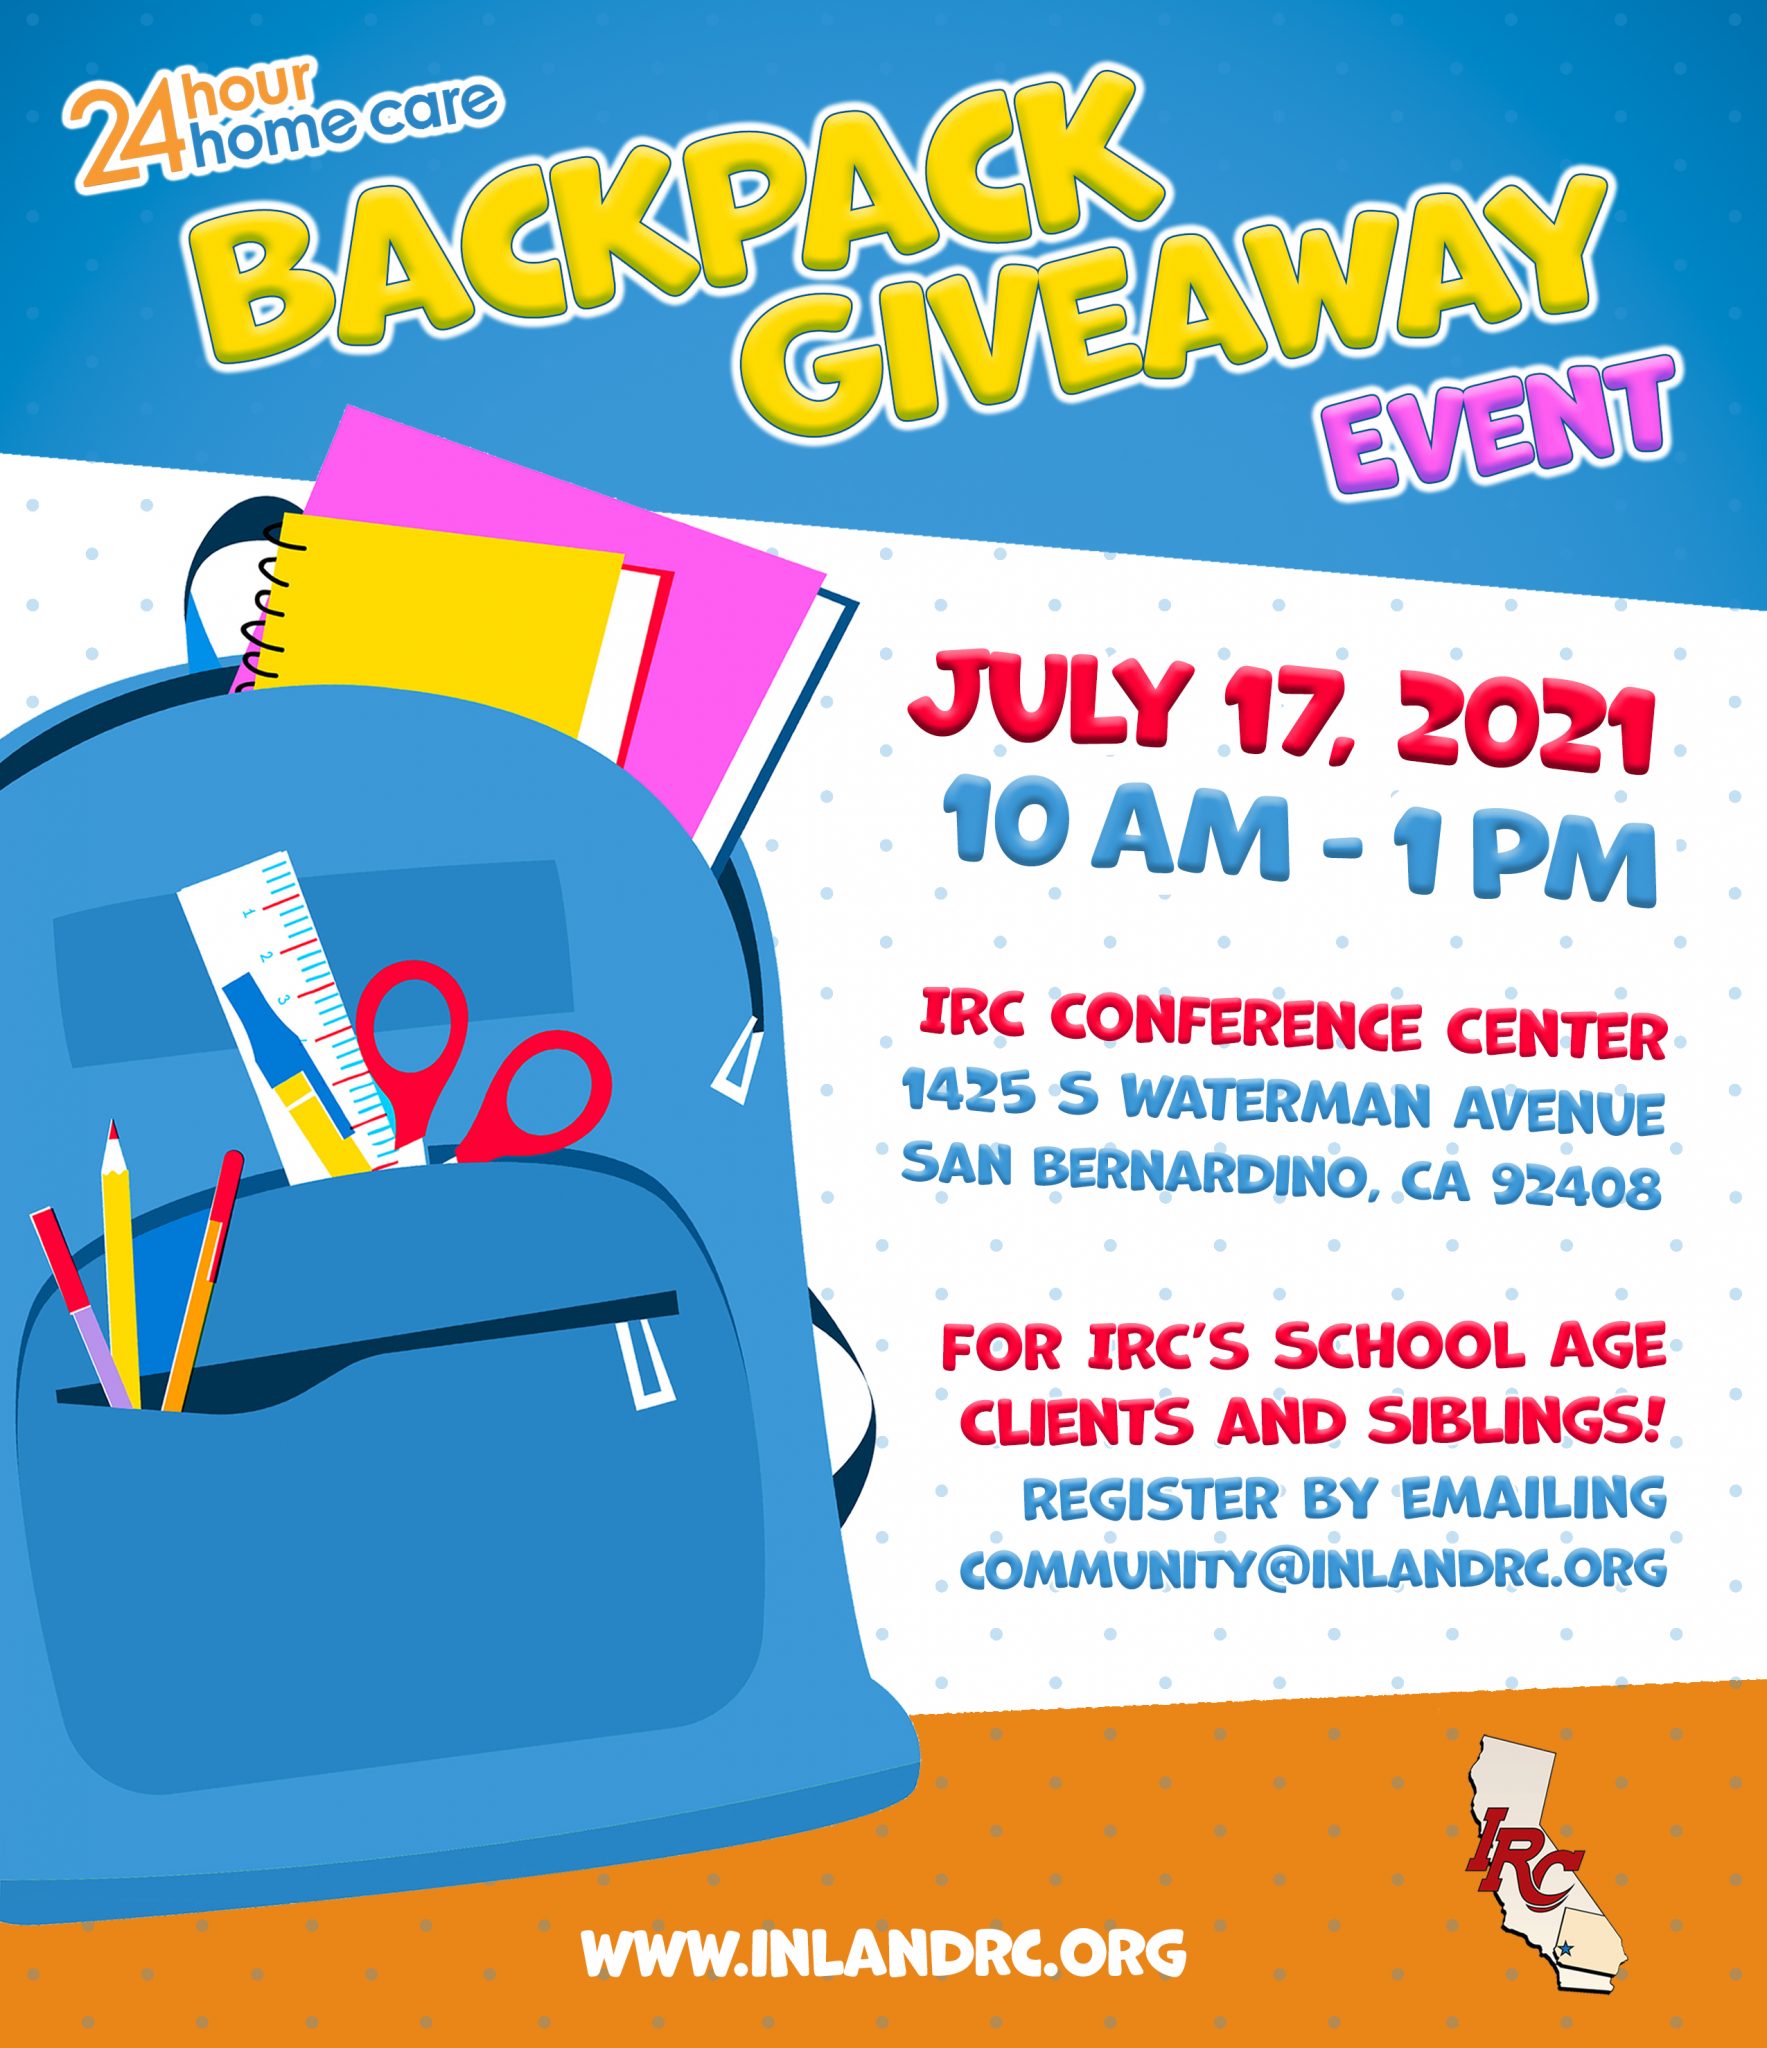 Backpack Giveaway Event Inland Regional Center